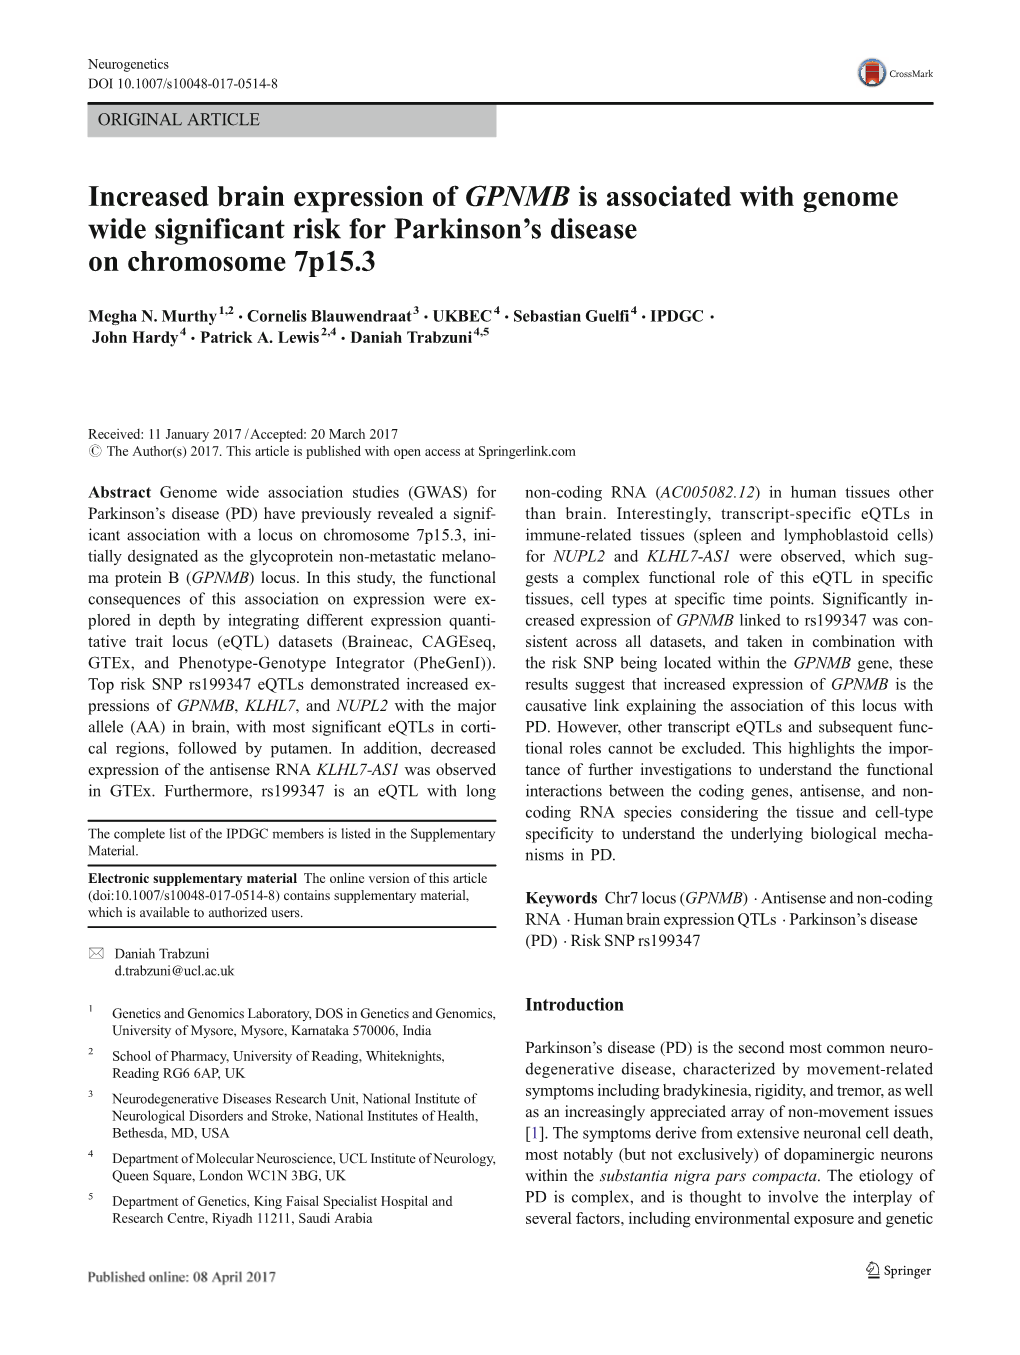 Increased Brain Expression of GPNMB Is Associated with Genome Wide Significant Risk for Parkinson’Sdisease on Chromosome 7P15.3